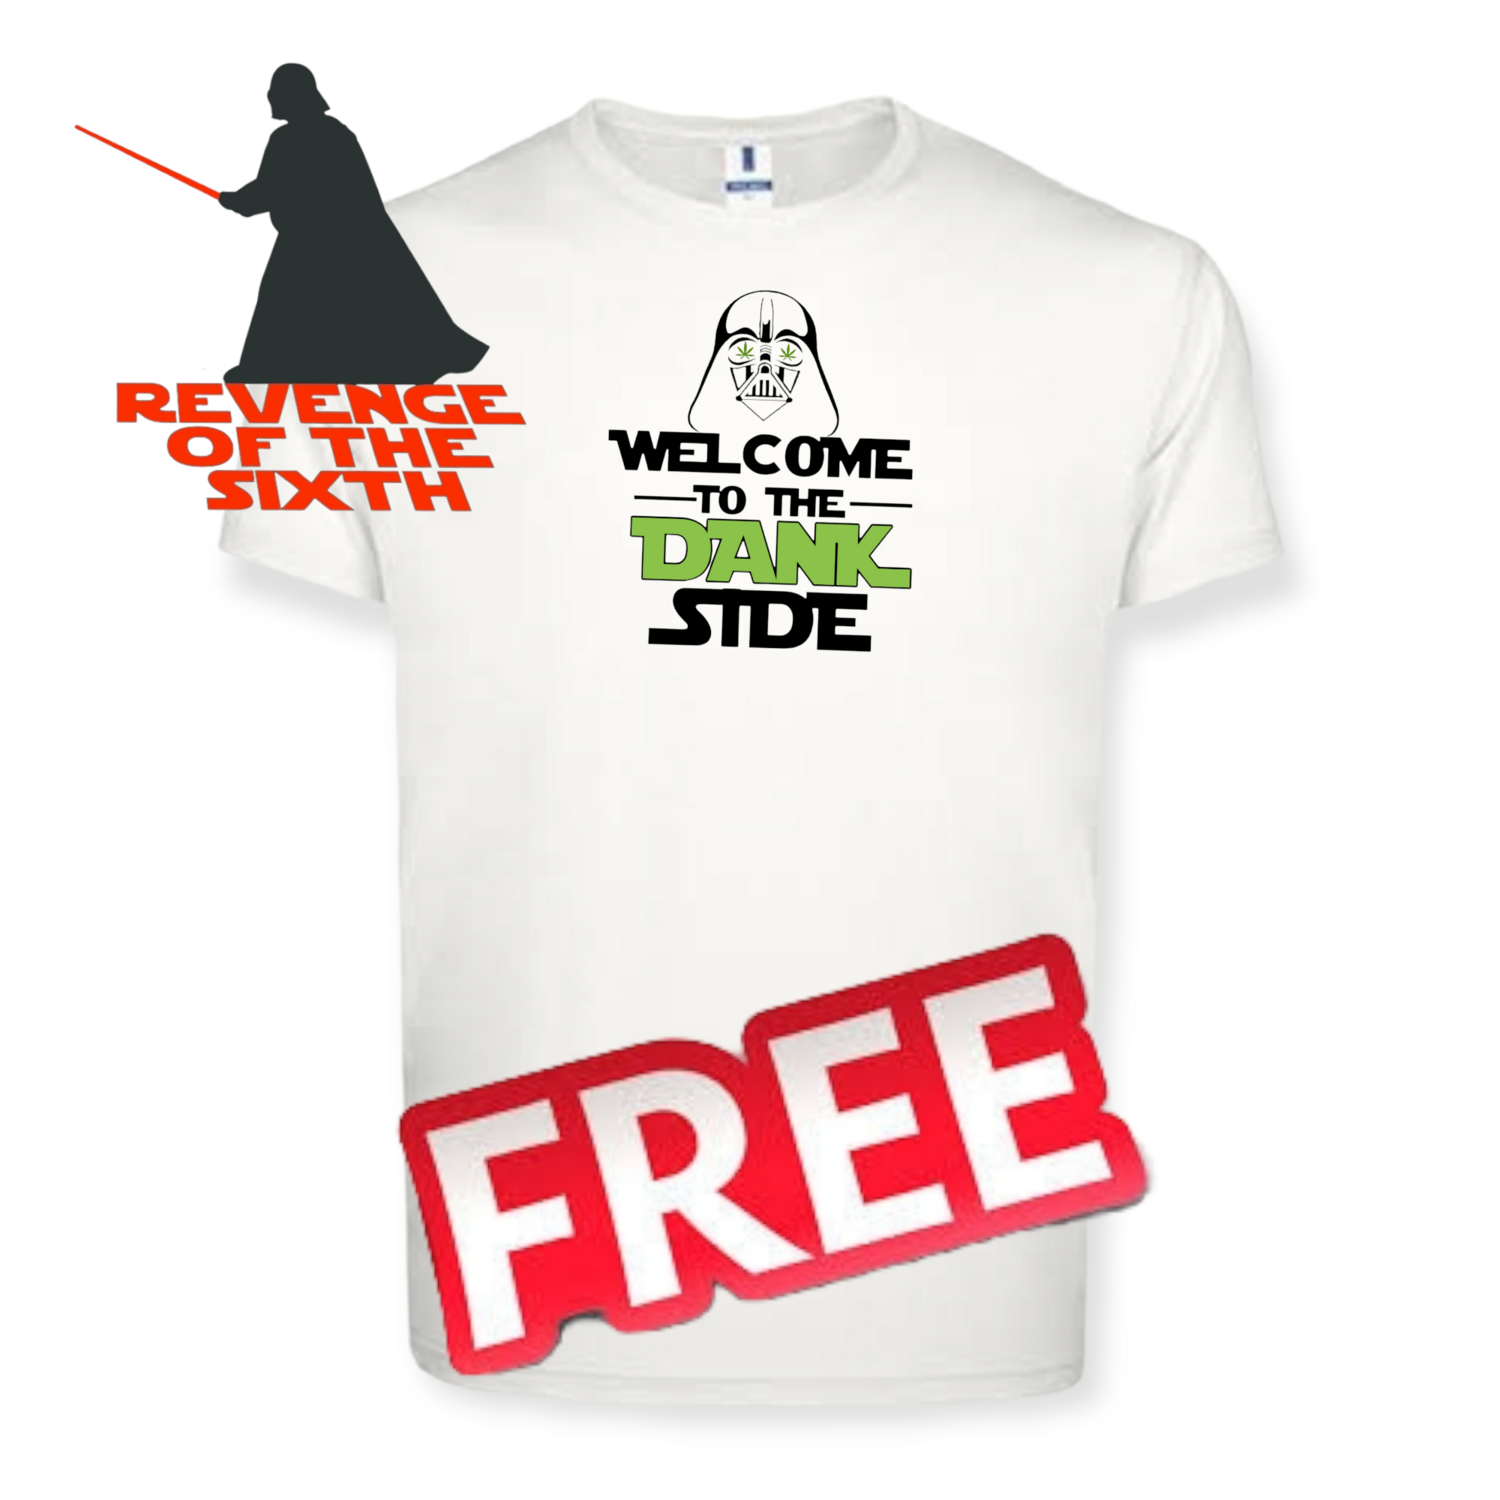 FREE T SHIRT revenge of the 6th dank side EDITION 
Only small to xl is free anything bigger  is a lil extra